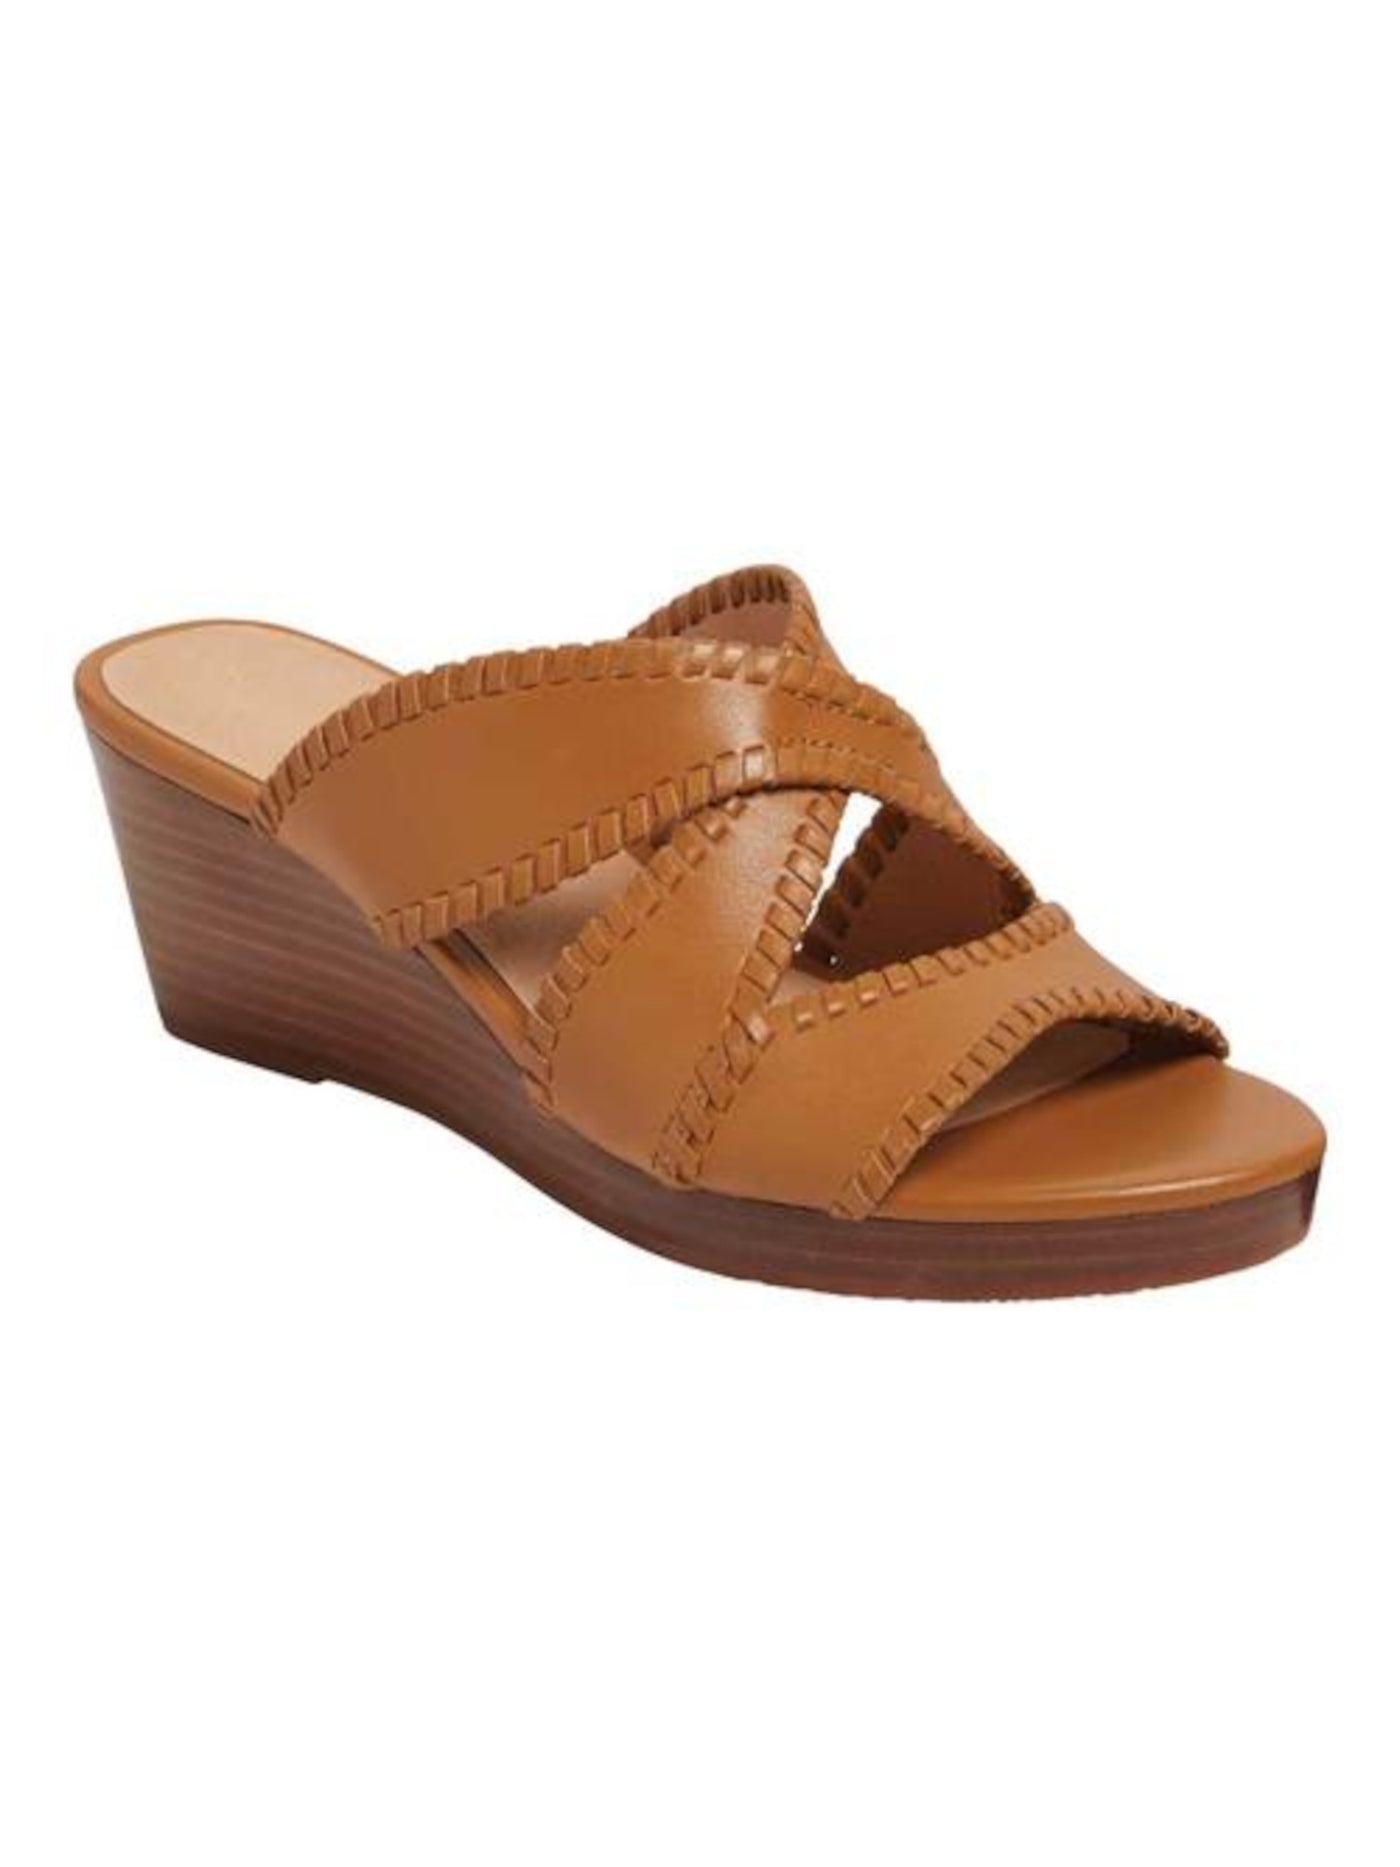 JACK ROGERS Womens Brown Whipstitch Comfort Strappy Jackie Round Toe Wedge Slip On Leather Slide Sandals 10 M